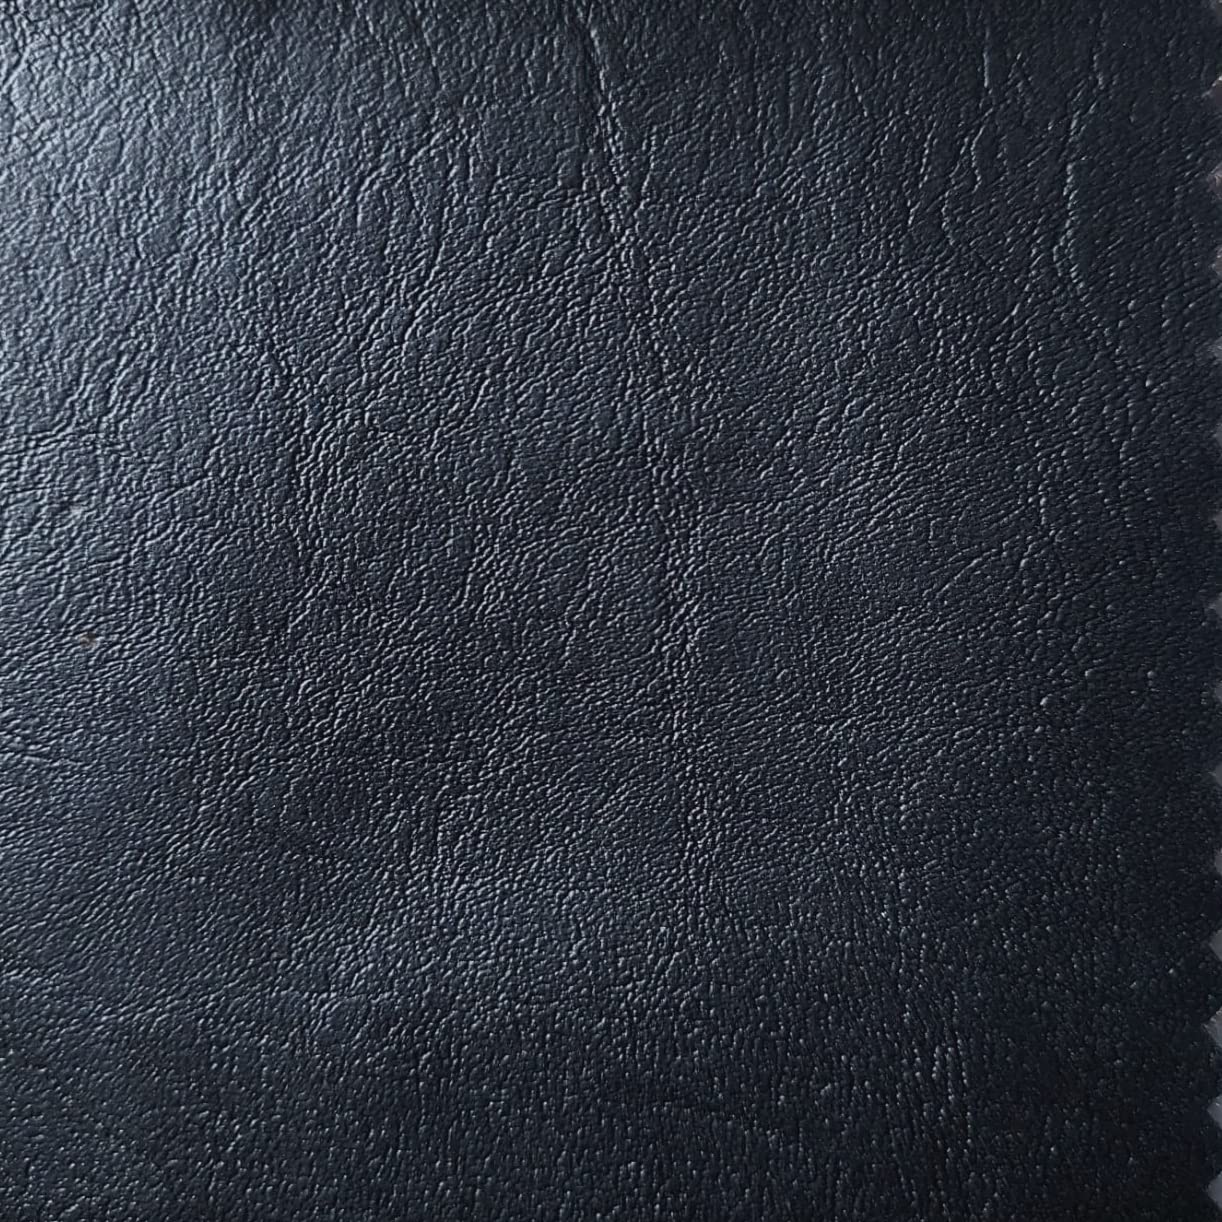 Bowzar Rexine Premium Faux Artificial Leather for Sofa Upholstery Home Furnishing